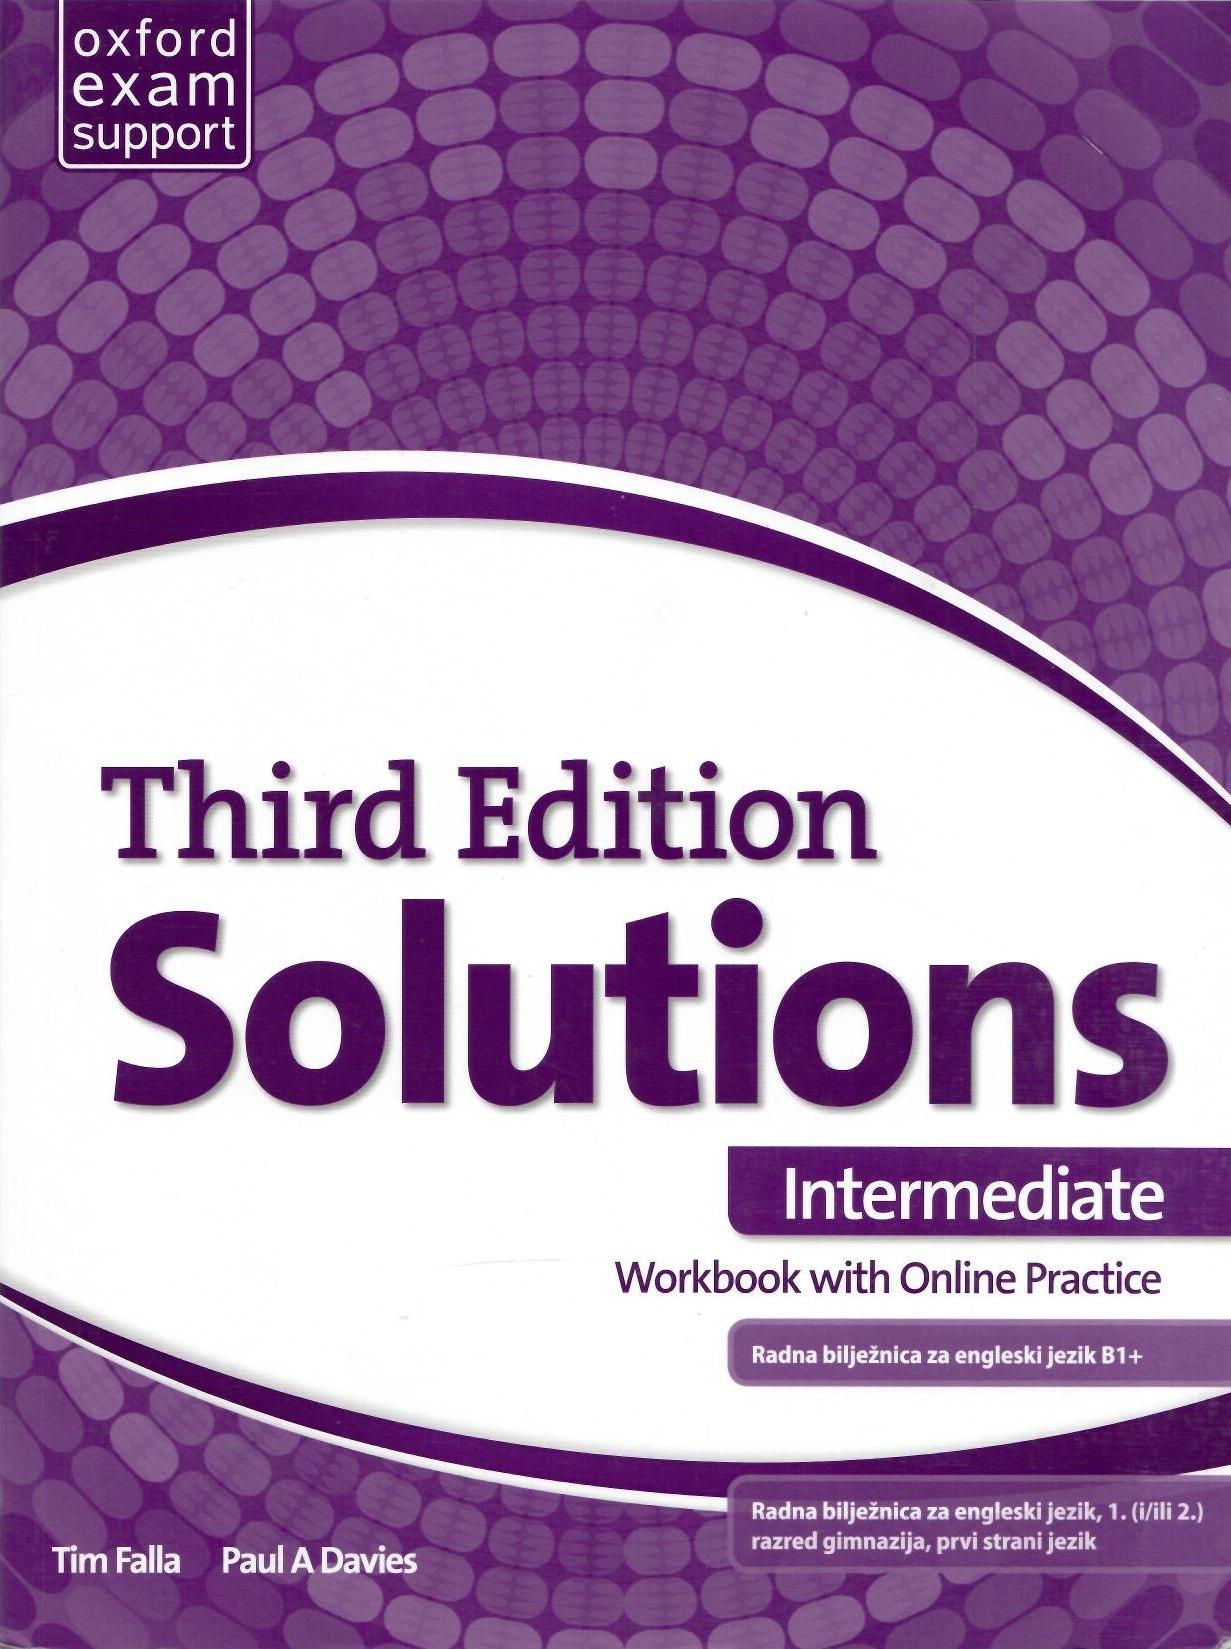 Solutions 3 edition tests